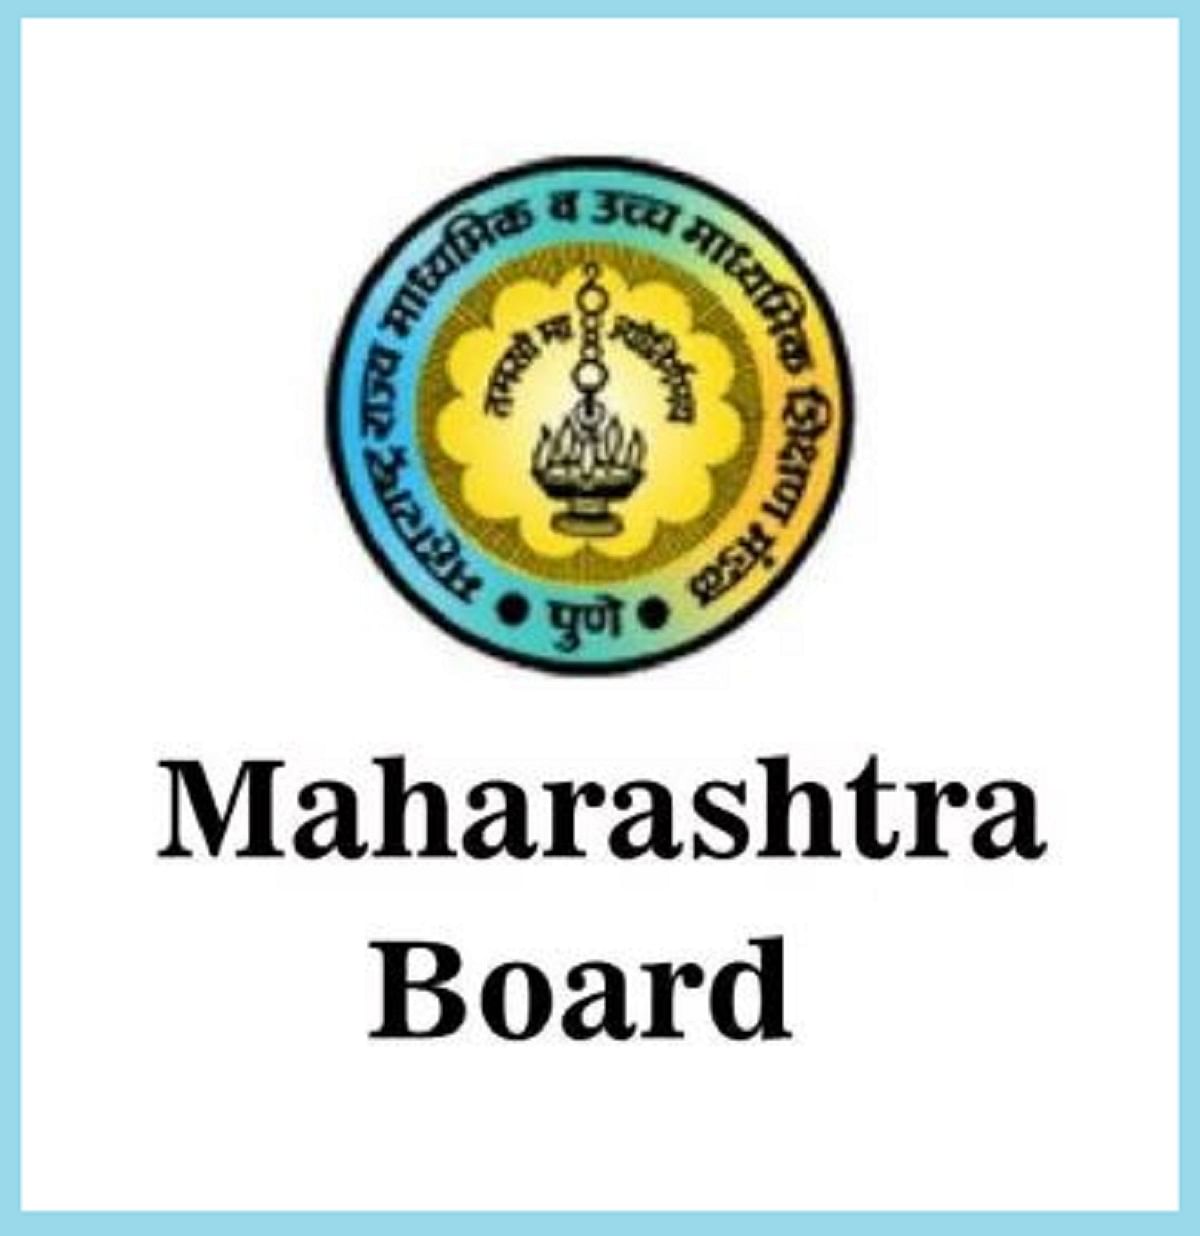 Maharashtra Board HSC, SSC Result 2020 Date Announced, Latest Updates Here